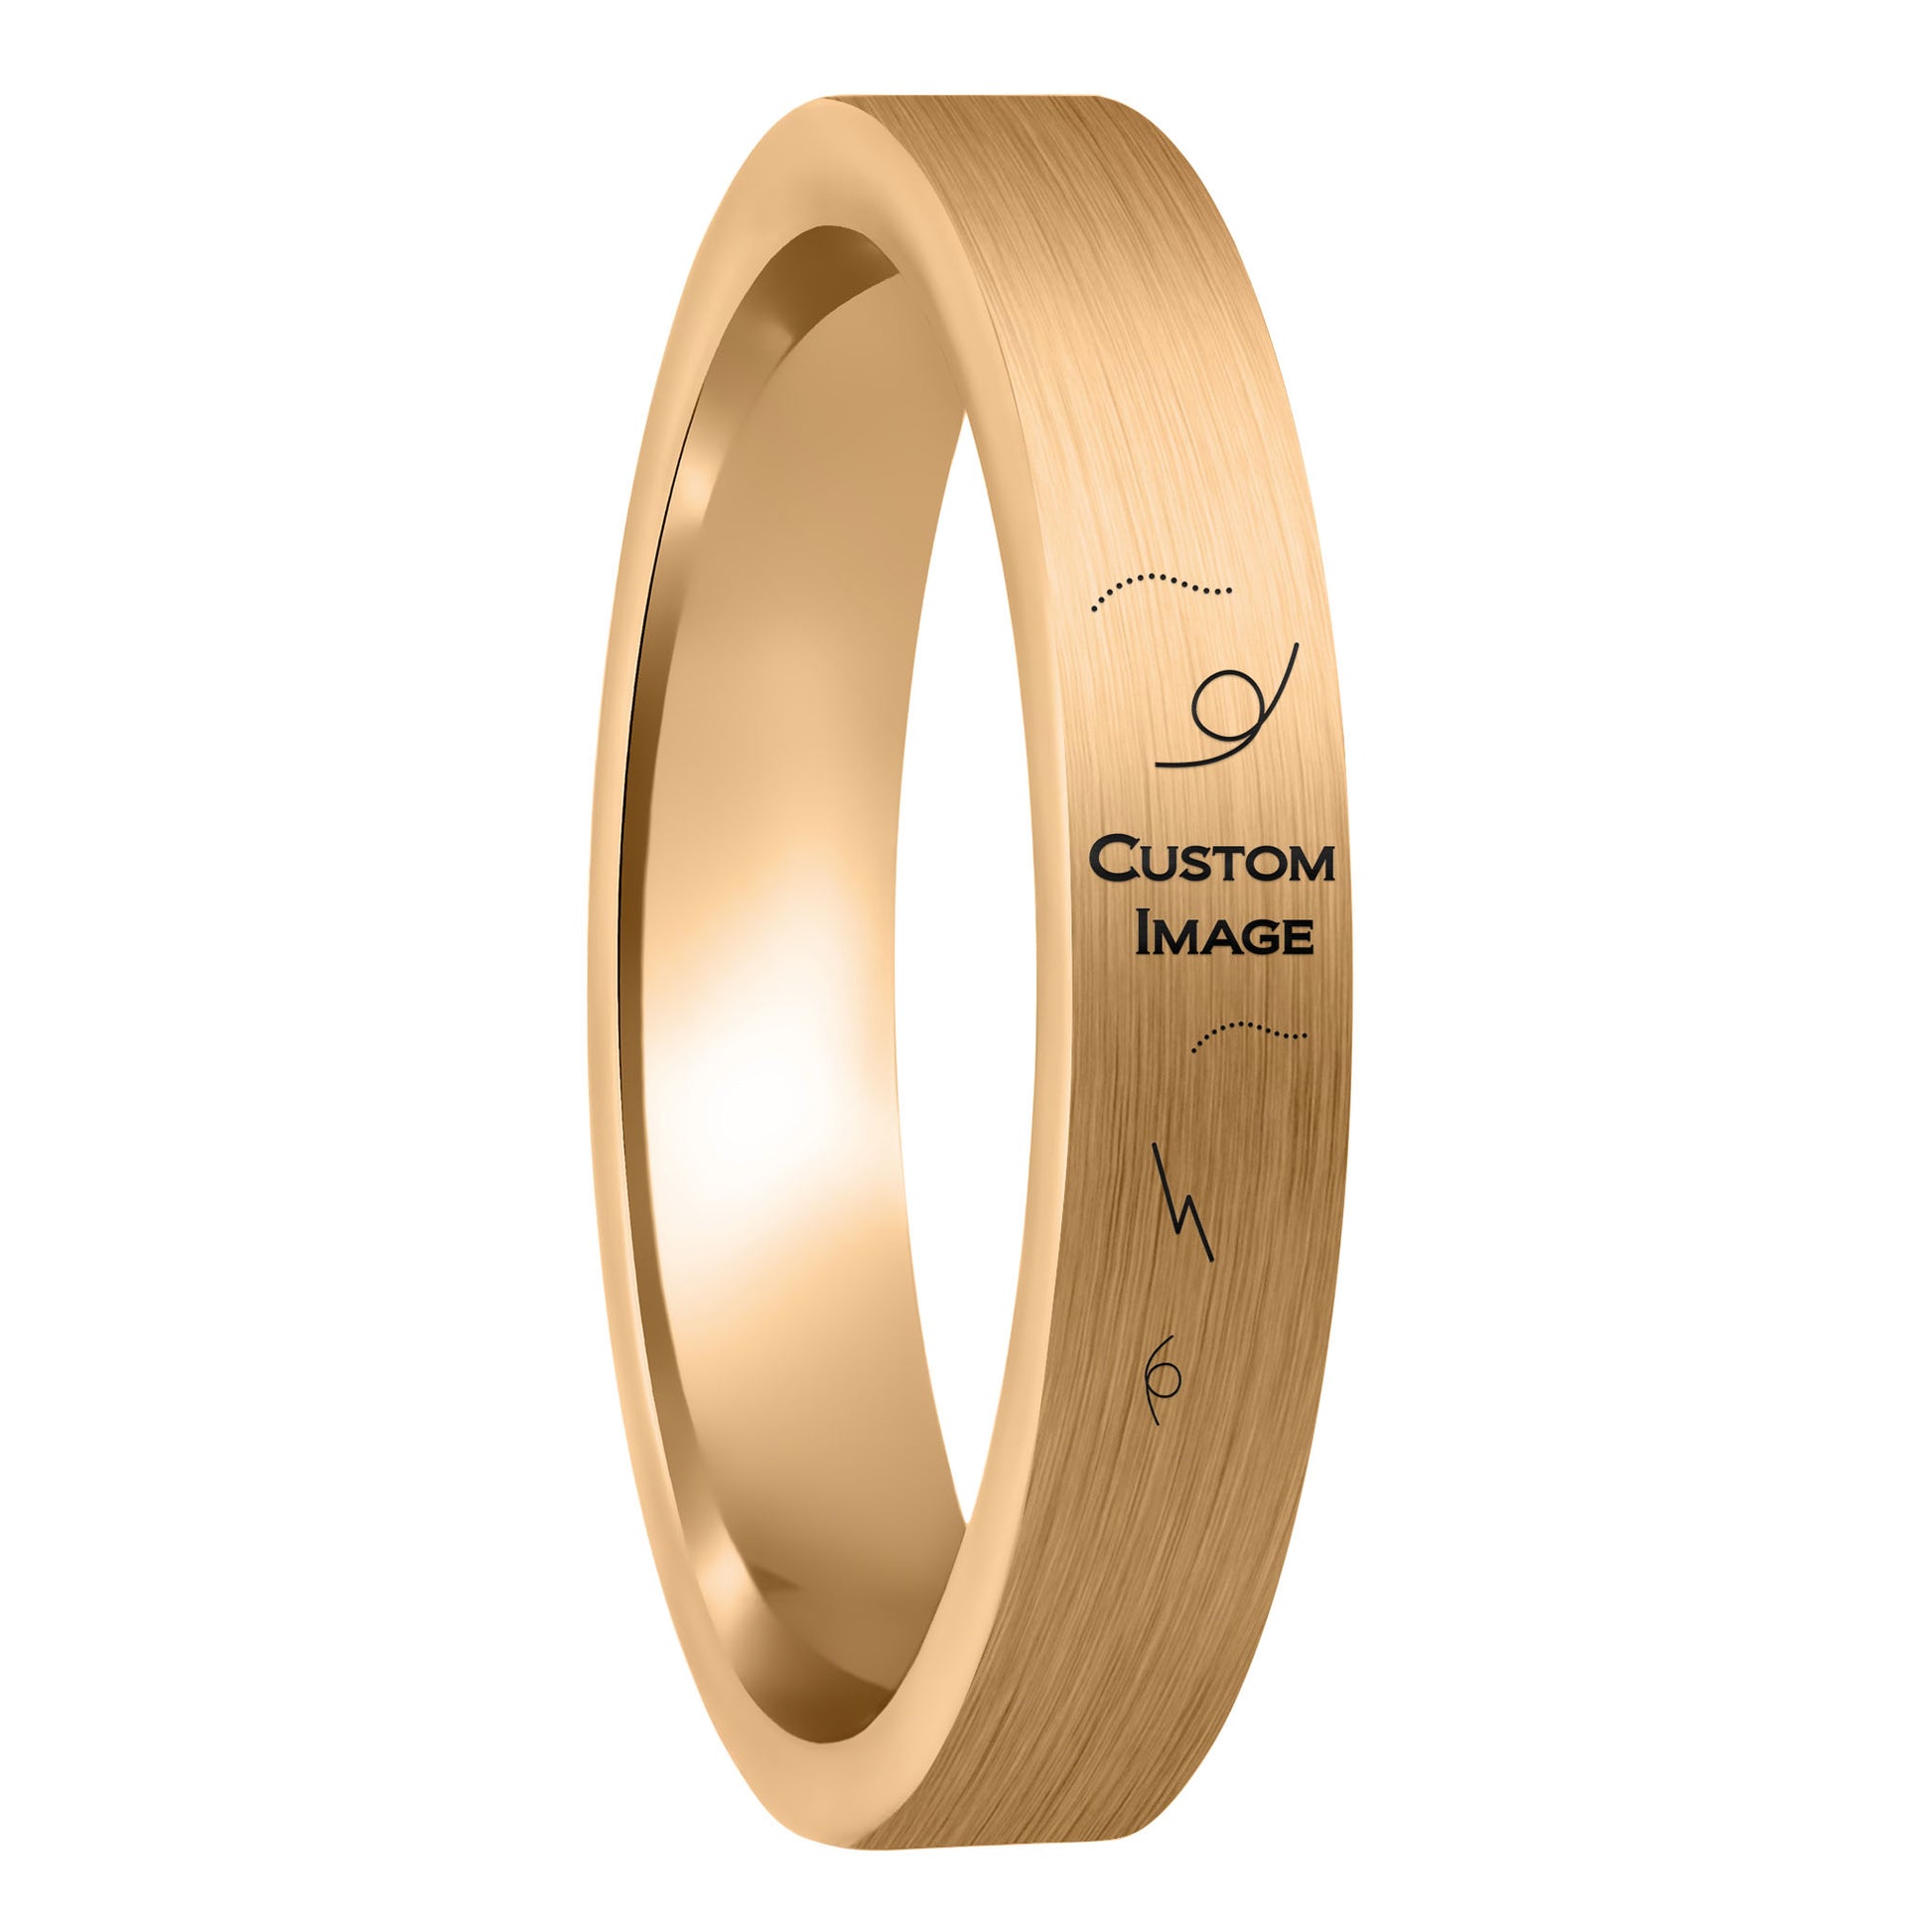 A custom image engraved brushed rose gold tungsten women's wedding band displayed on a plain white background.